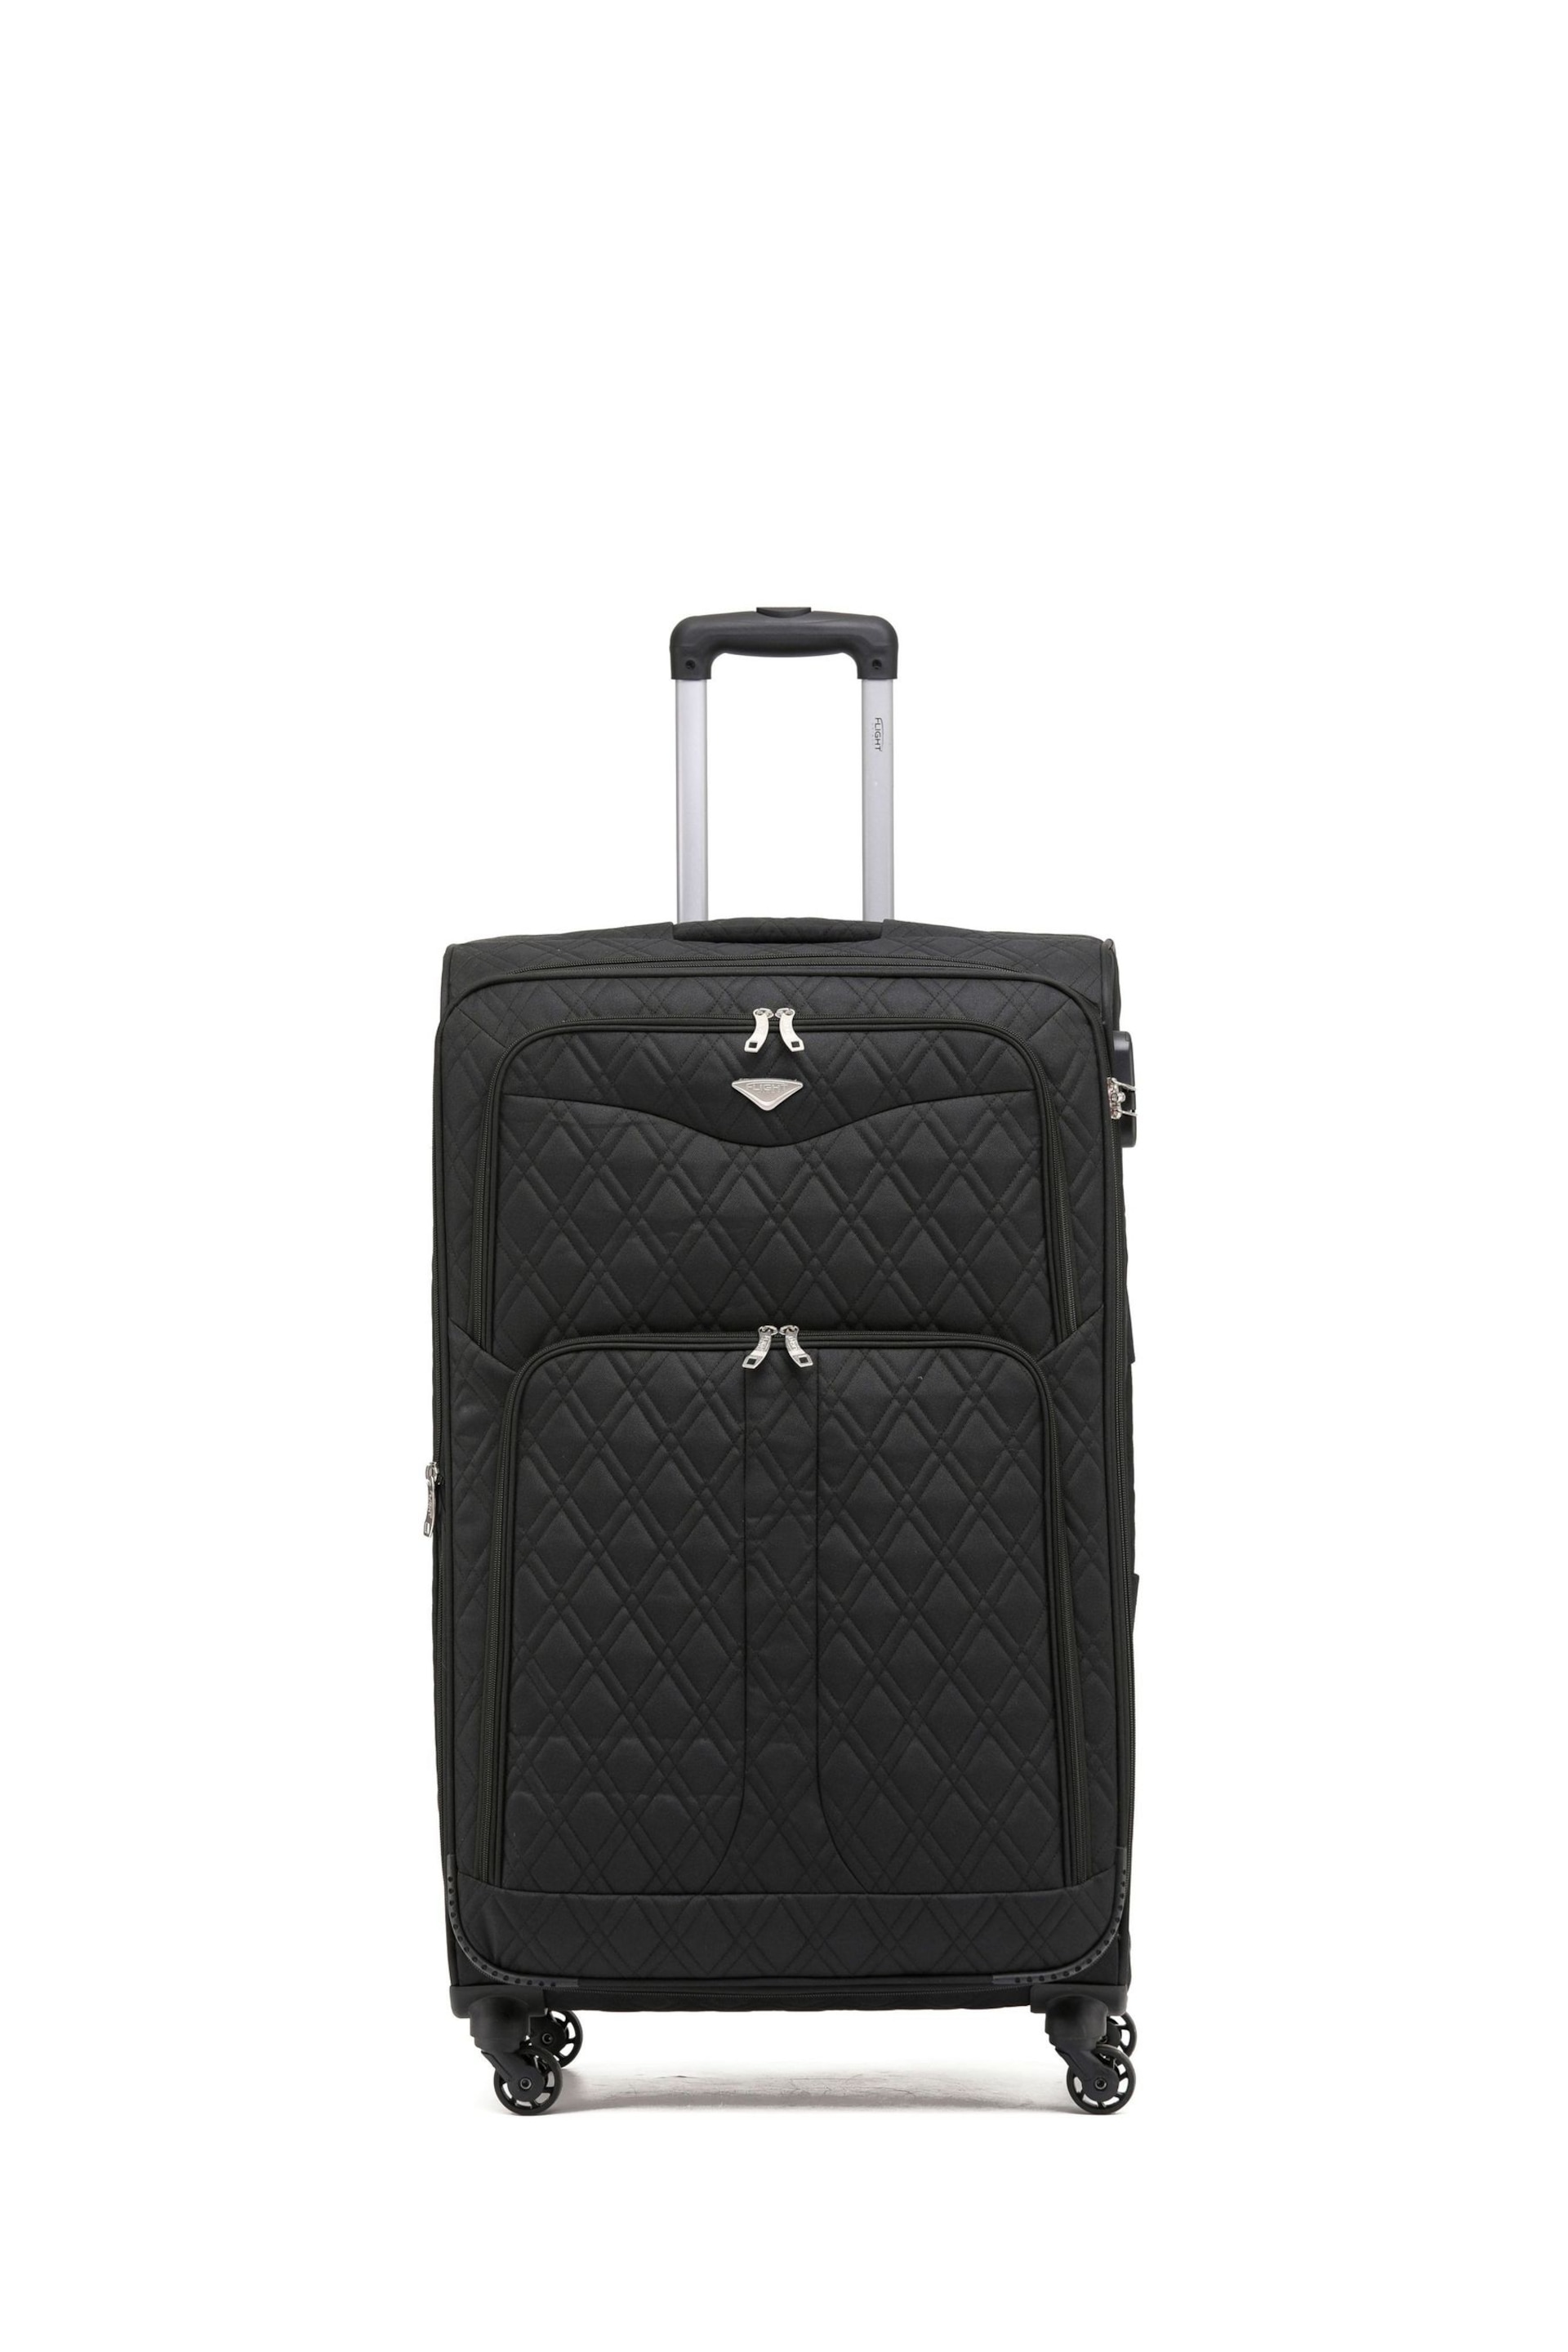 Flight Knight Large Softcase Lightweight Check In Suitcase With 4 Wheels - Image 1 of 7